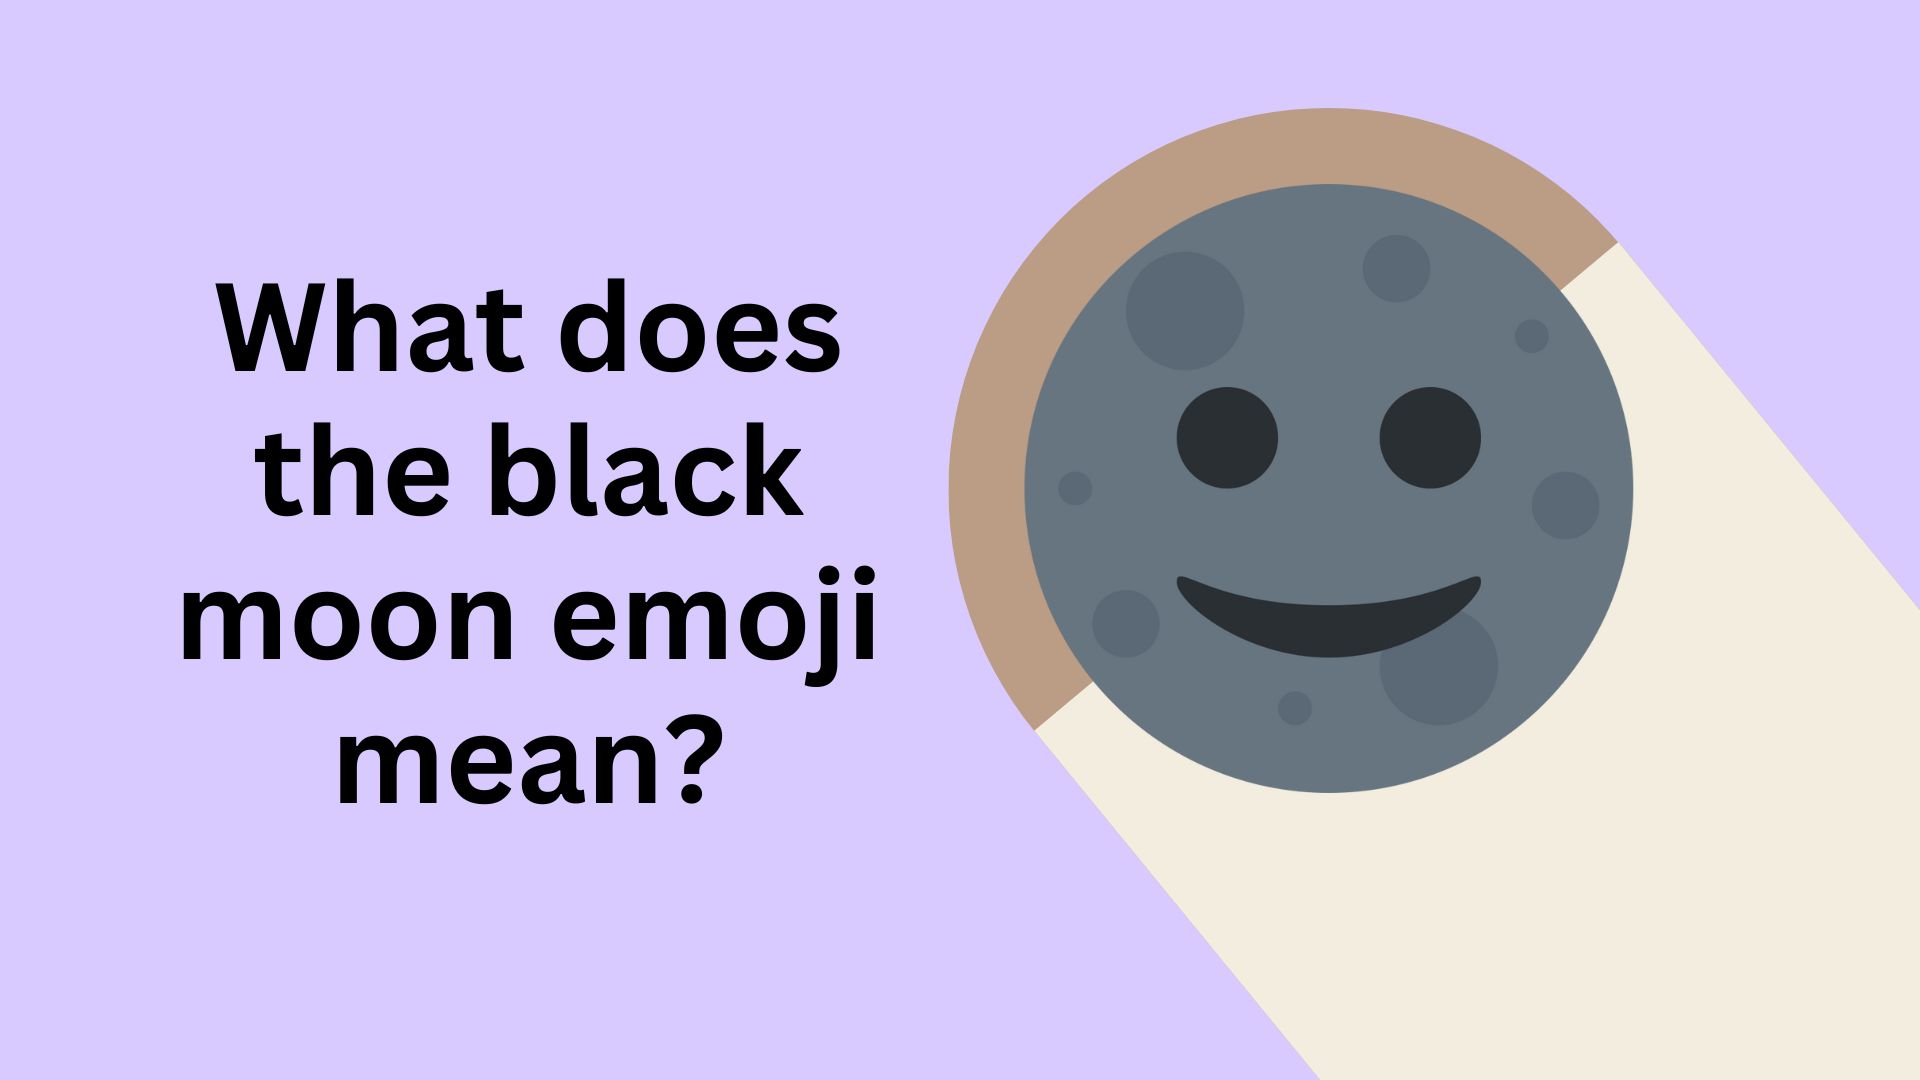 What does the black moon emoji mean